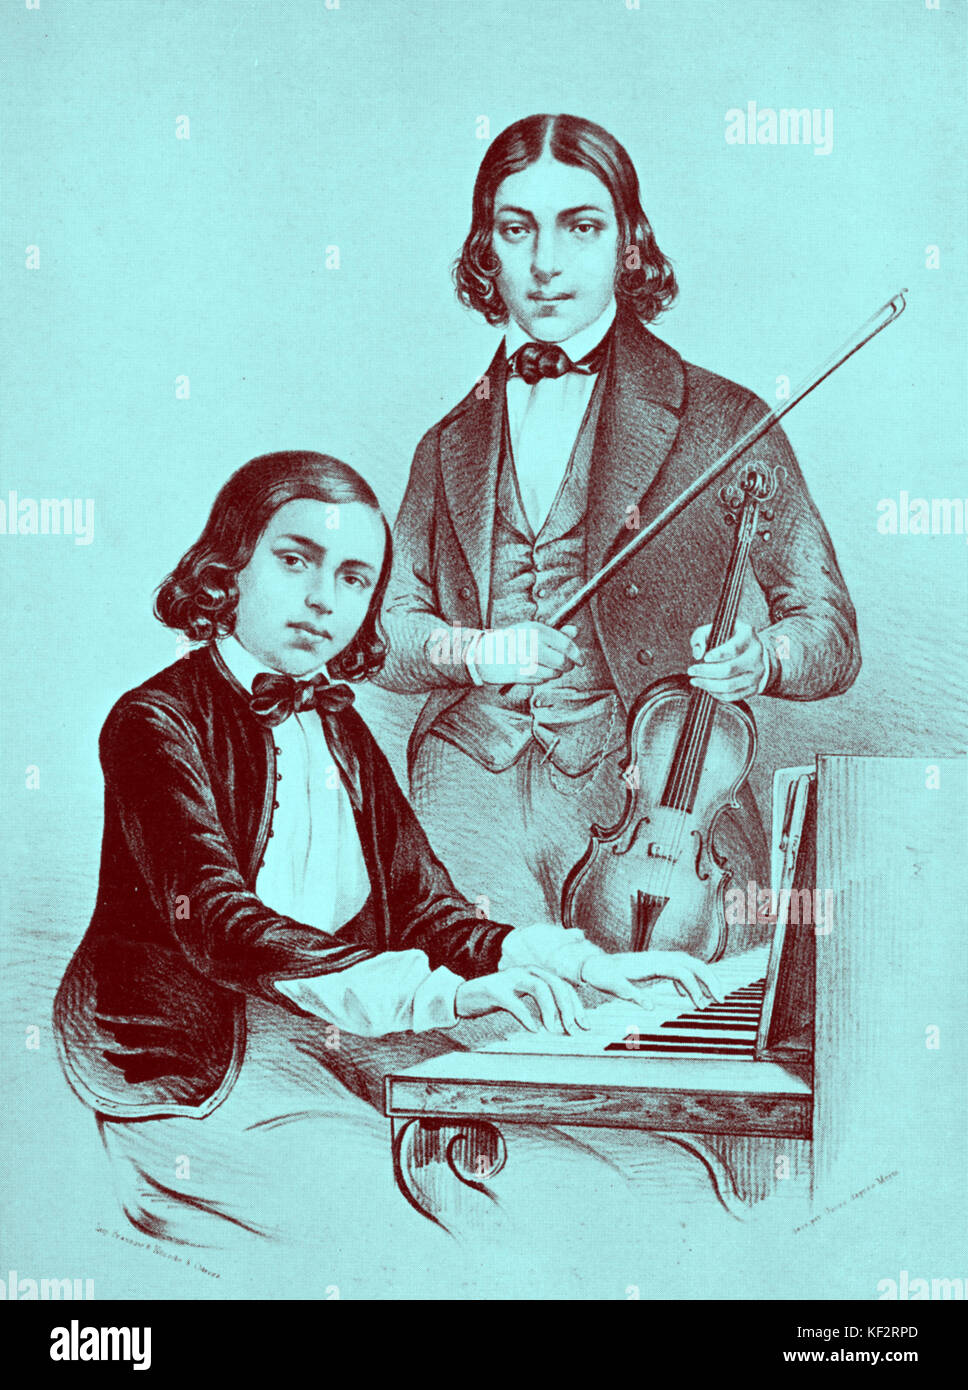 Jozef WIENIAWSKI at the piano and Henryk with violin. Polish pianist and composer 1837 - 1912, brother of Henryk Wieniawski; Polish violinist and composer (1835 - 1880) Stock Photo